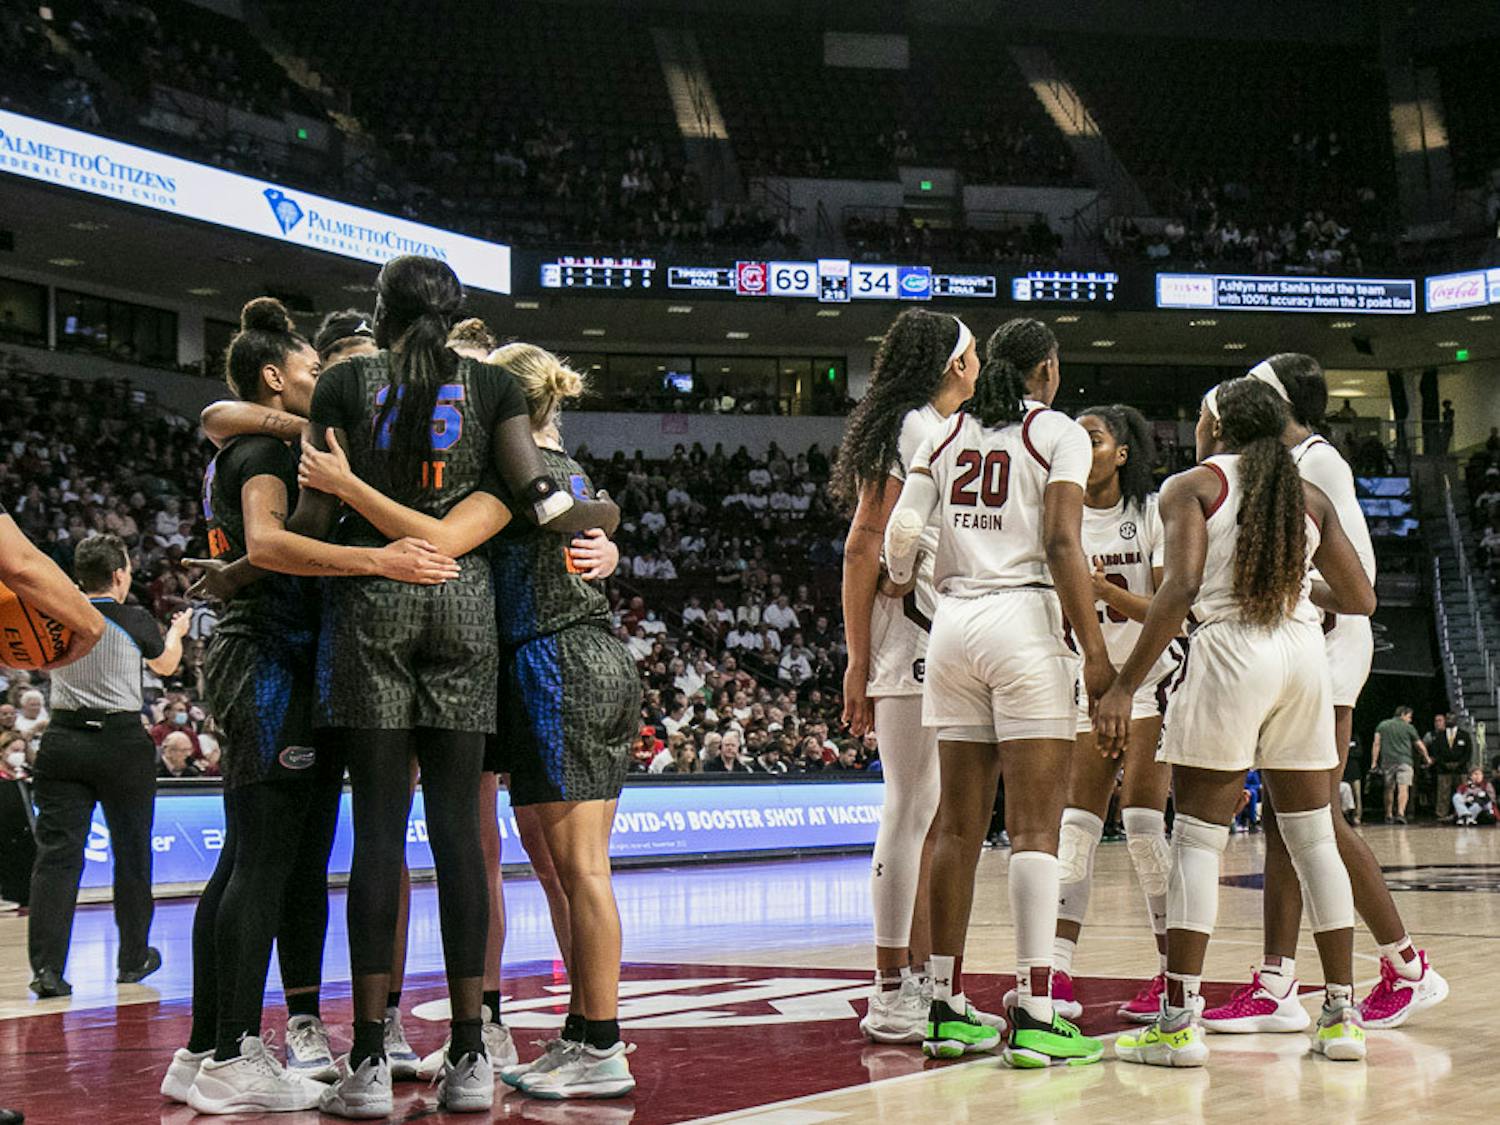 South Carolina and Florida huddle up after a foul during the match at Colonial Life Arena on Feb. 16, 2023. The Gamecocks beat the Gators 87-56.